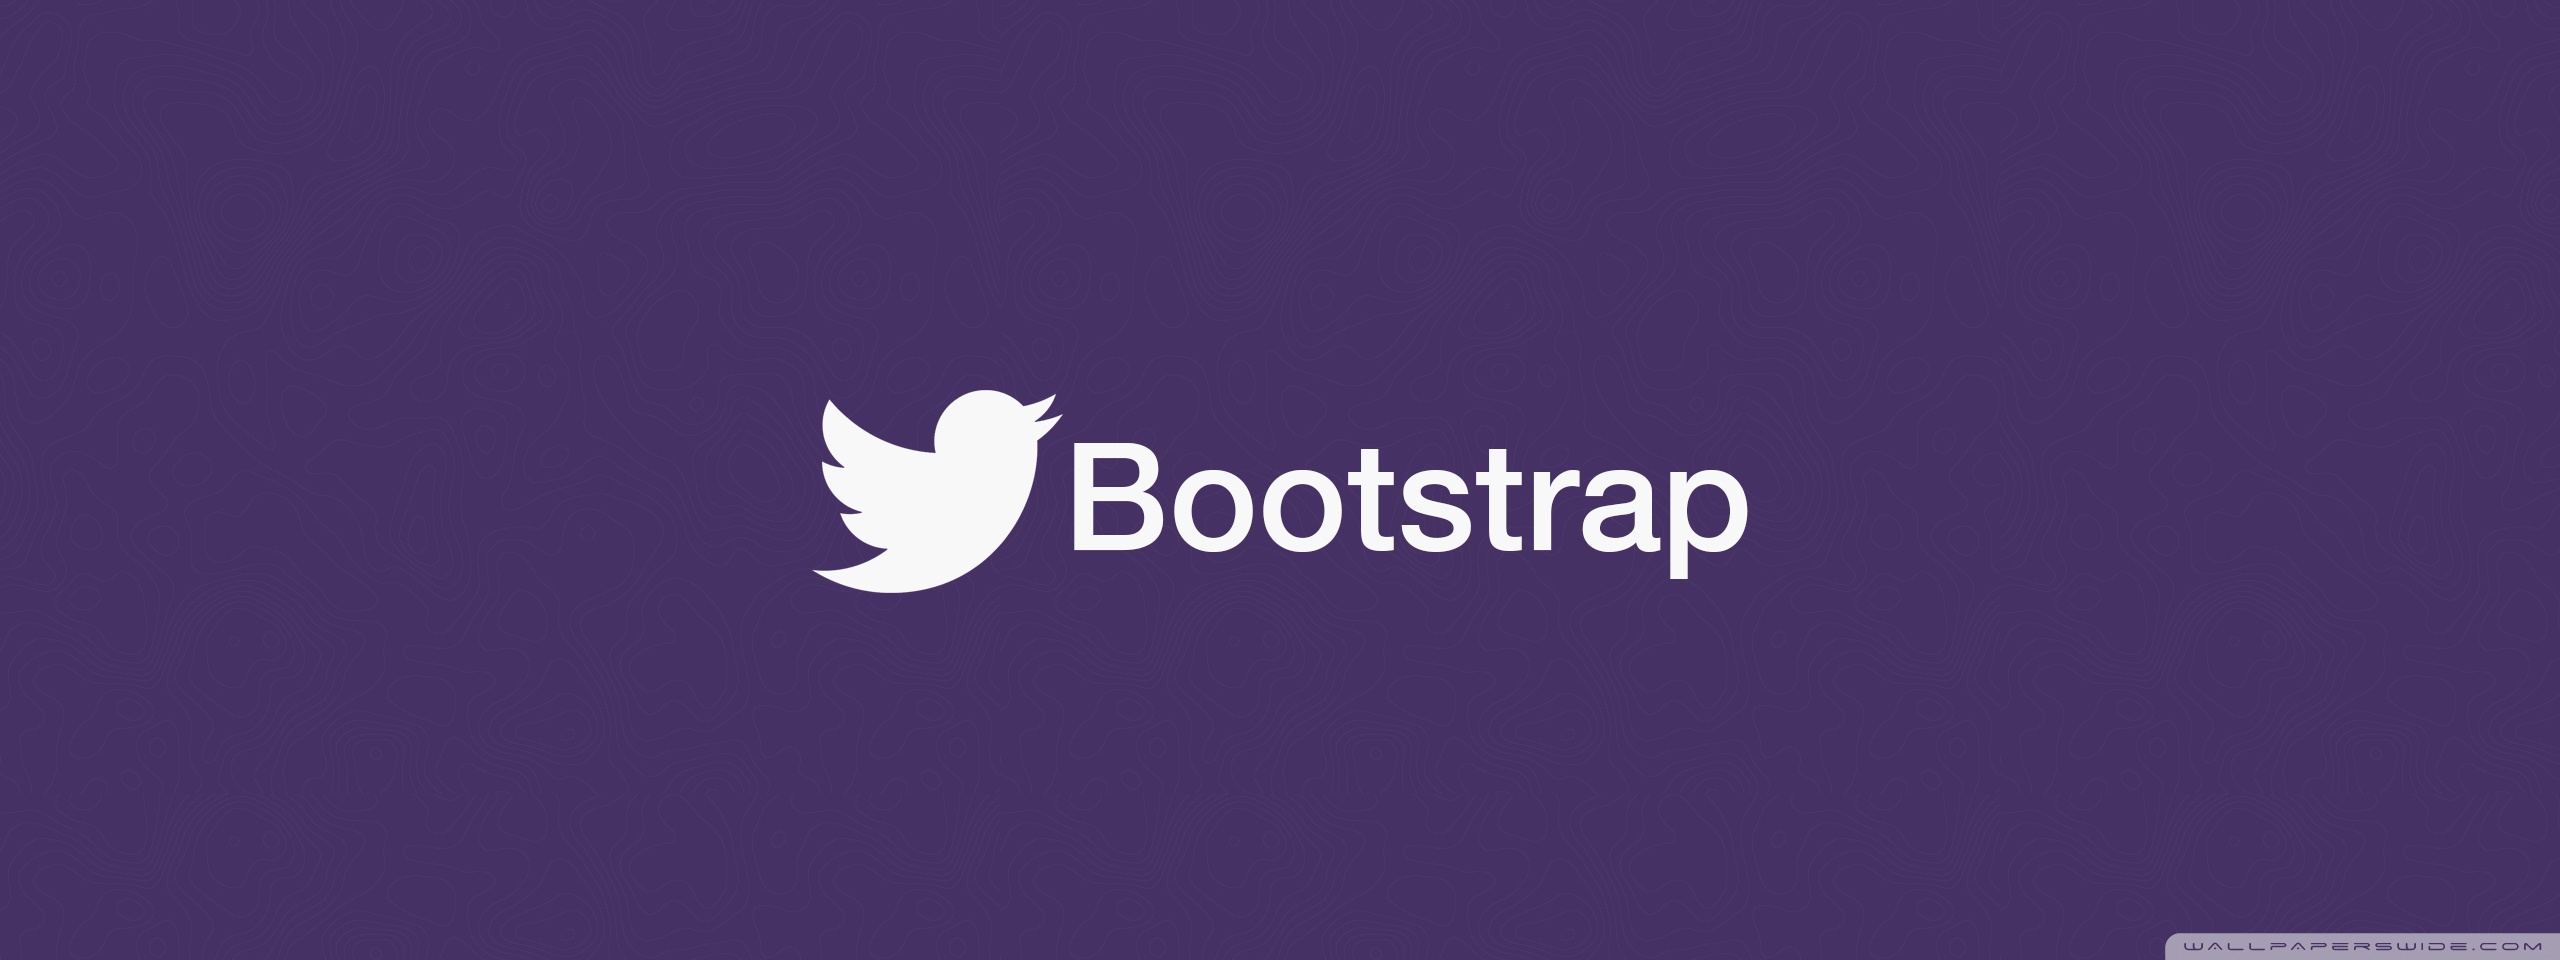 Bootstrap boot. Bootstrap. Картинка Bootstrap. Bootstrap 5. Bootstrap 3.